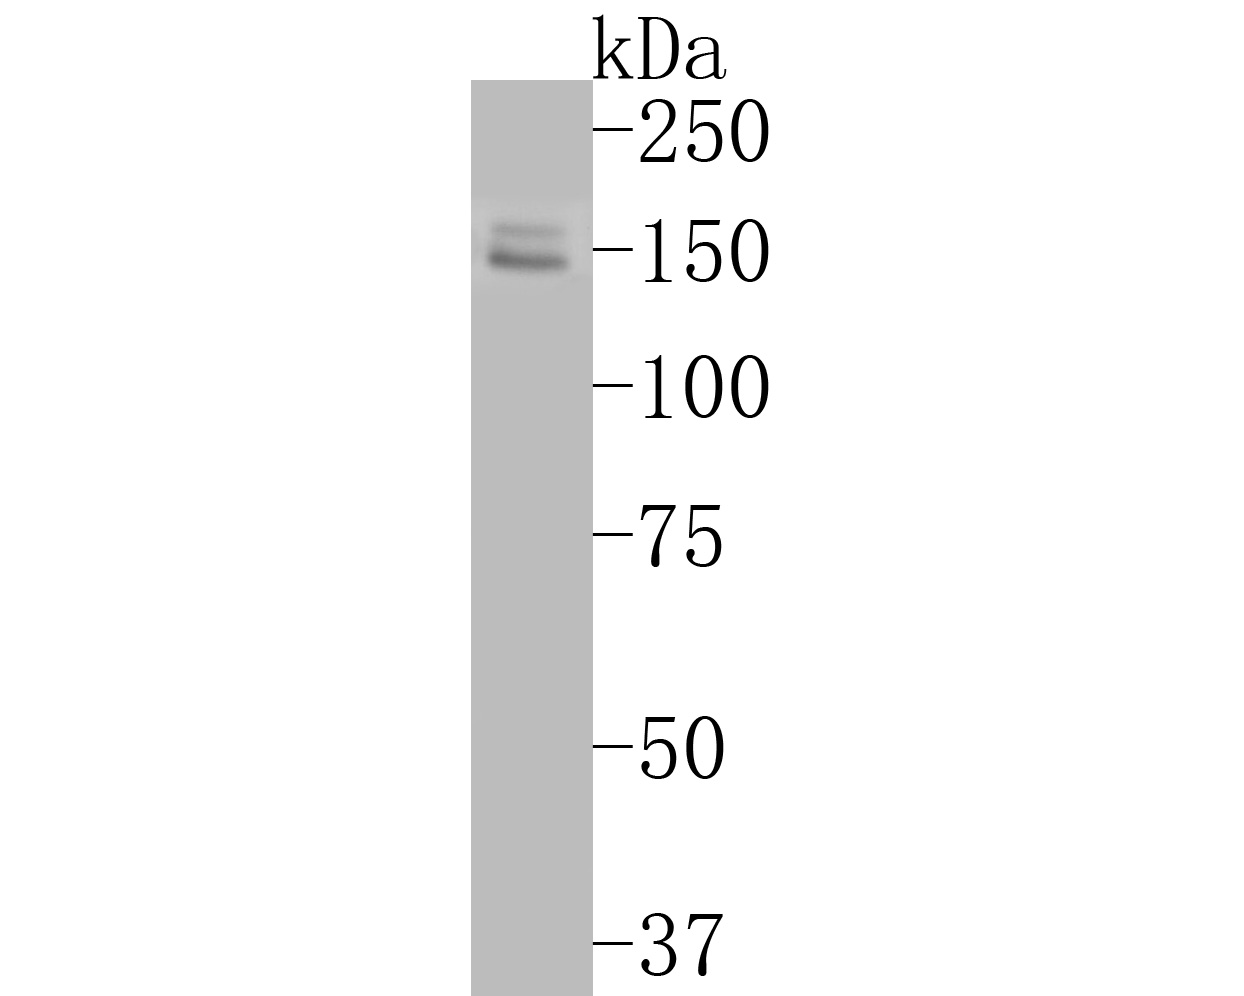 Western blot analysis of FYCO1 on SK-Br-3 cell lysates. Proteins were transferred to a PVDF membrane and blocked with 5% BSA in PBS for 1 hour at room temperature. The primary antibody (ER2001-04, 1/500) was used in 5% BSA at room temperature for 2 hours. Goat Anti-Rabbit IgG - HRP Secondary Antibody (HA1001) at 1:5,000 dilution was used for 1 hour at room temperature.